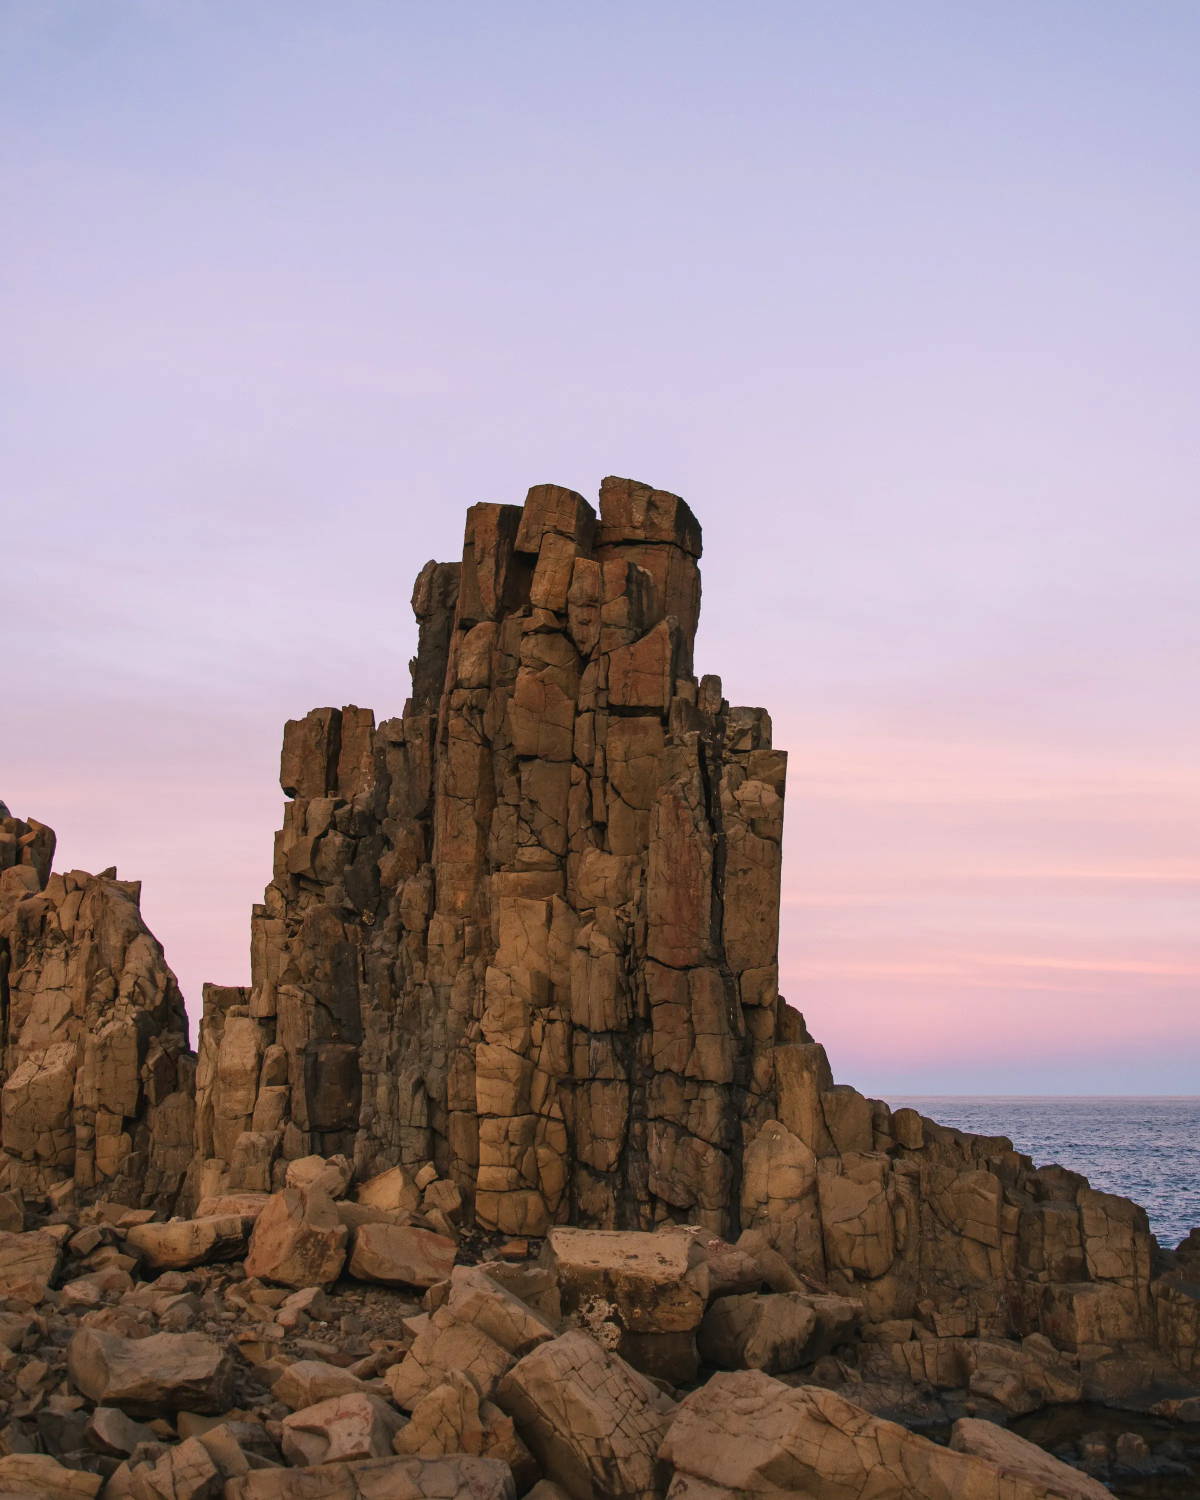 Rock formation set against a pink and purple sunset